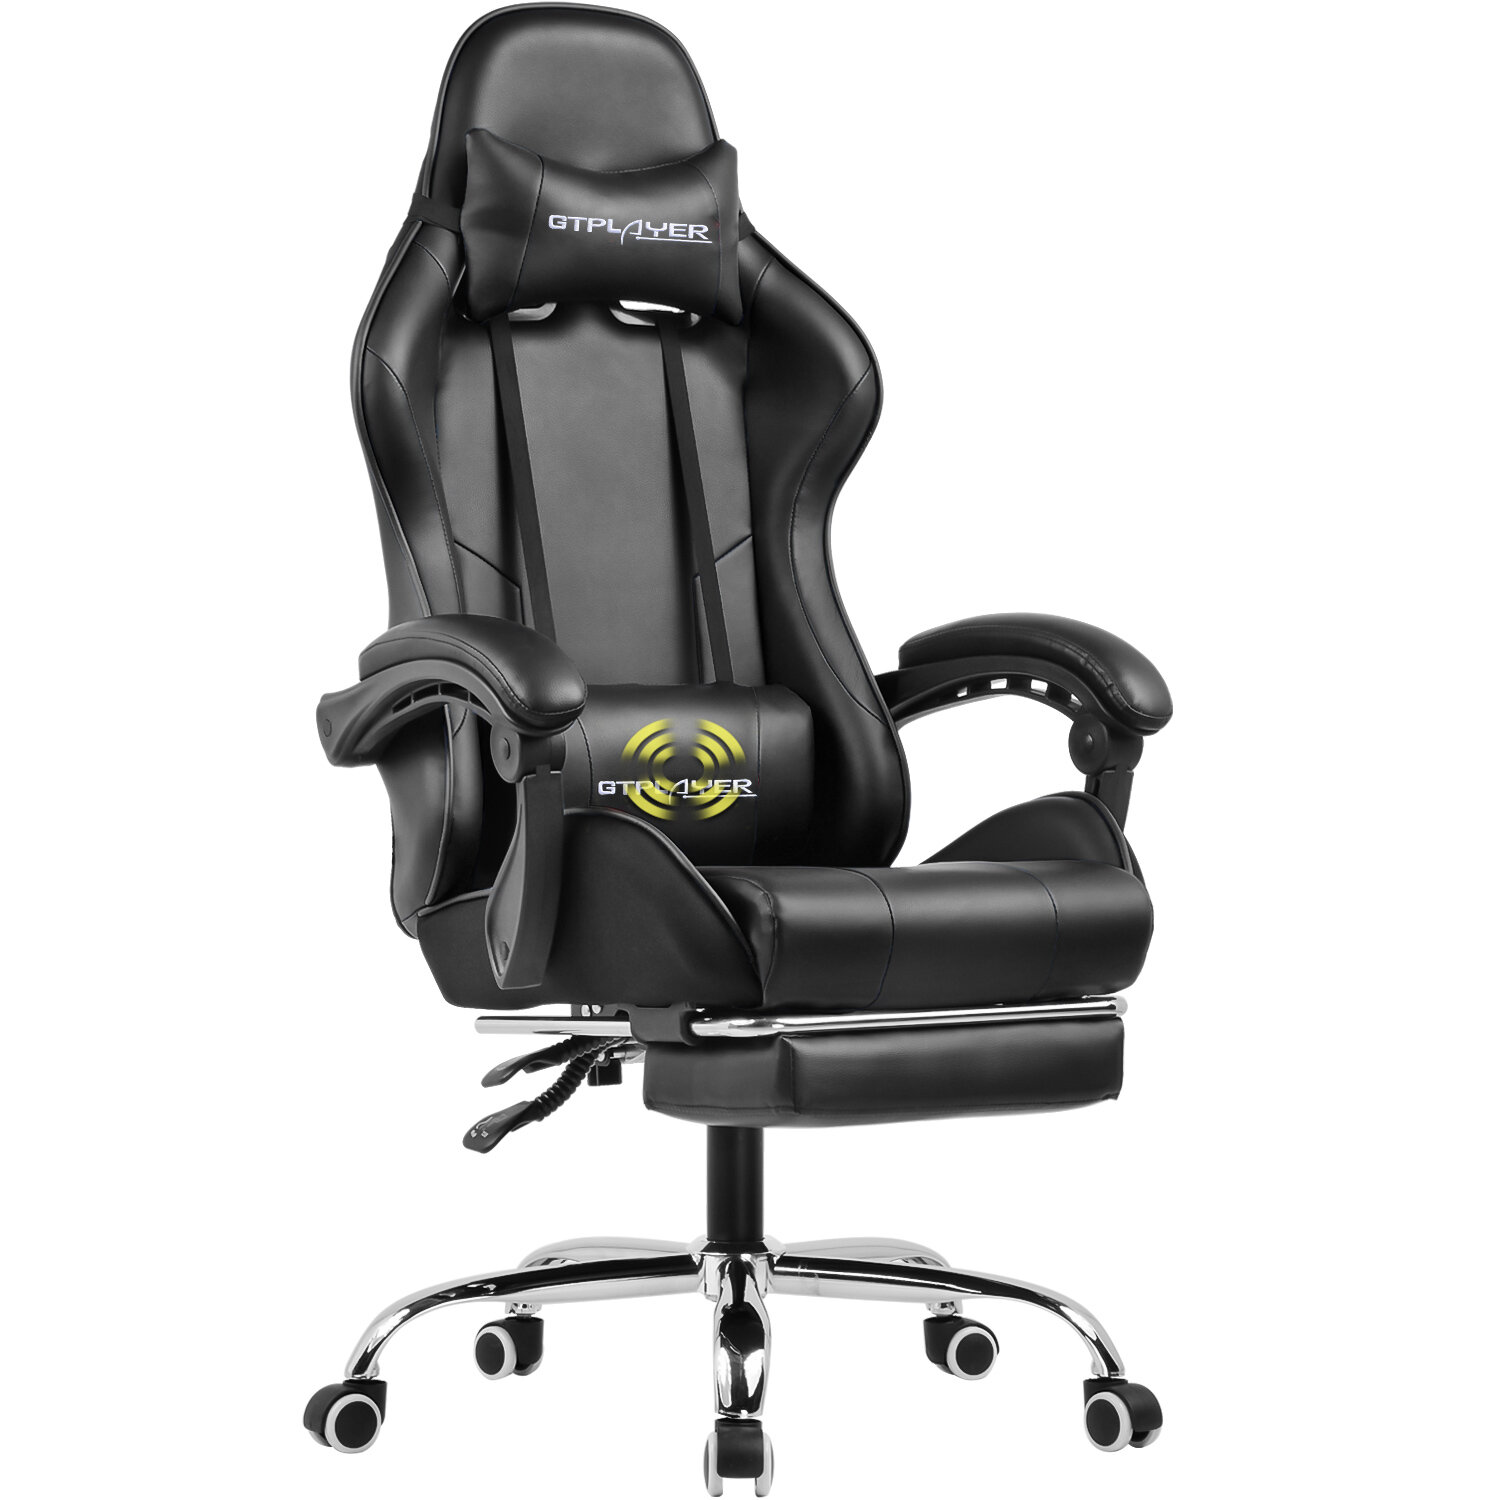 Gtracing Ergonomic Gaming Chair With Footrest And Massage Reviews Wayfair